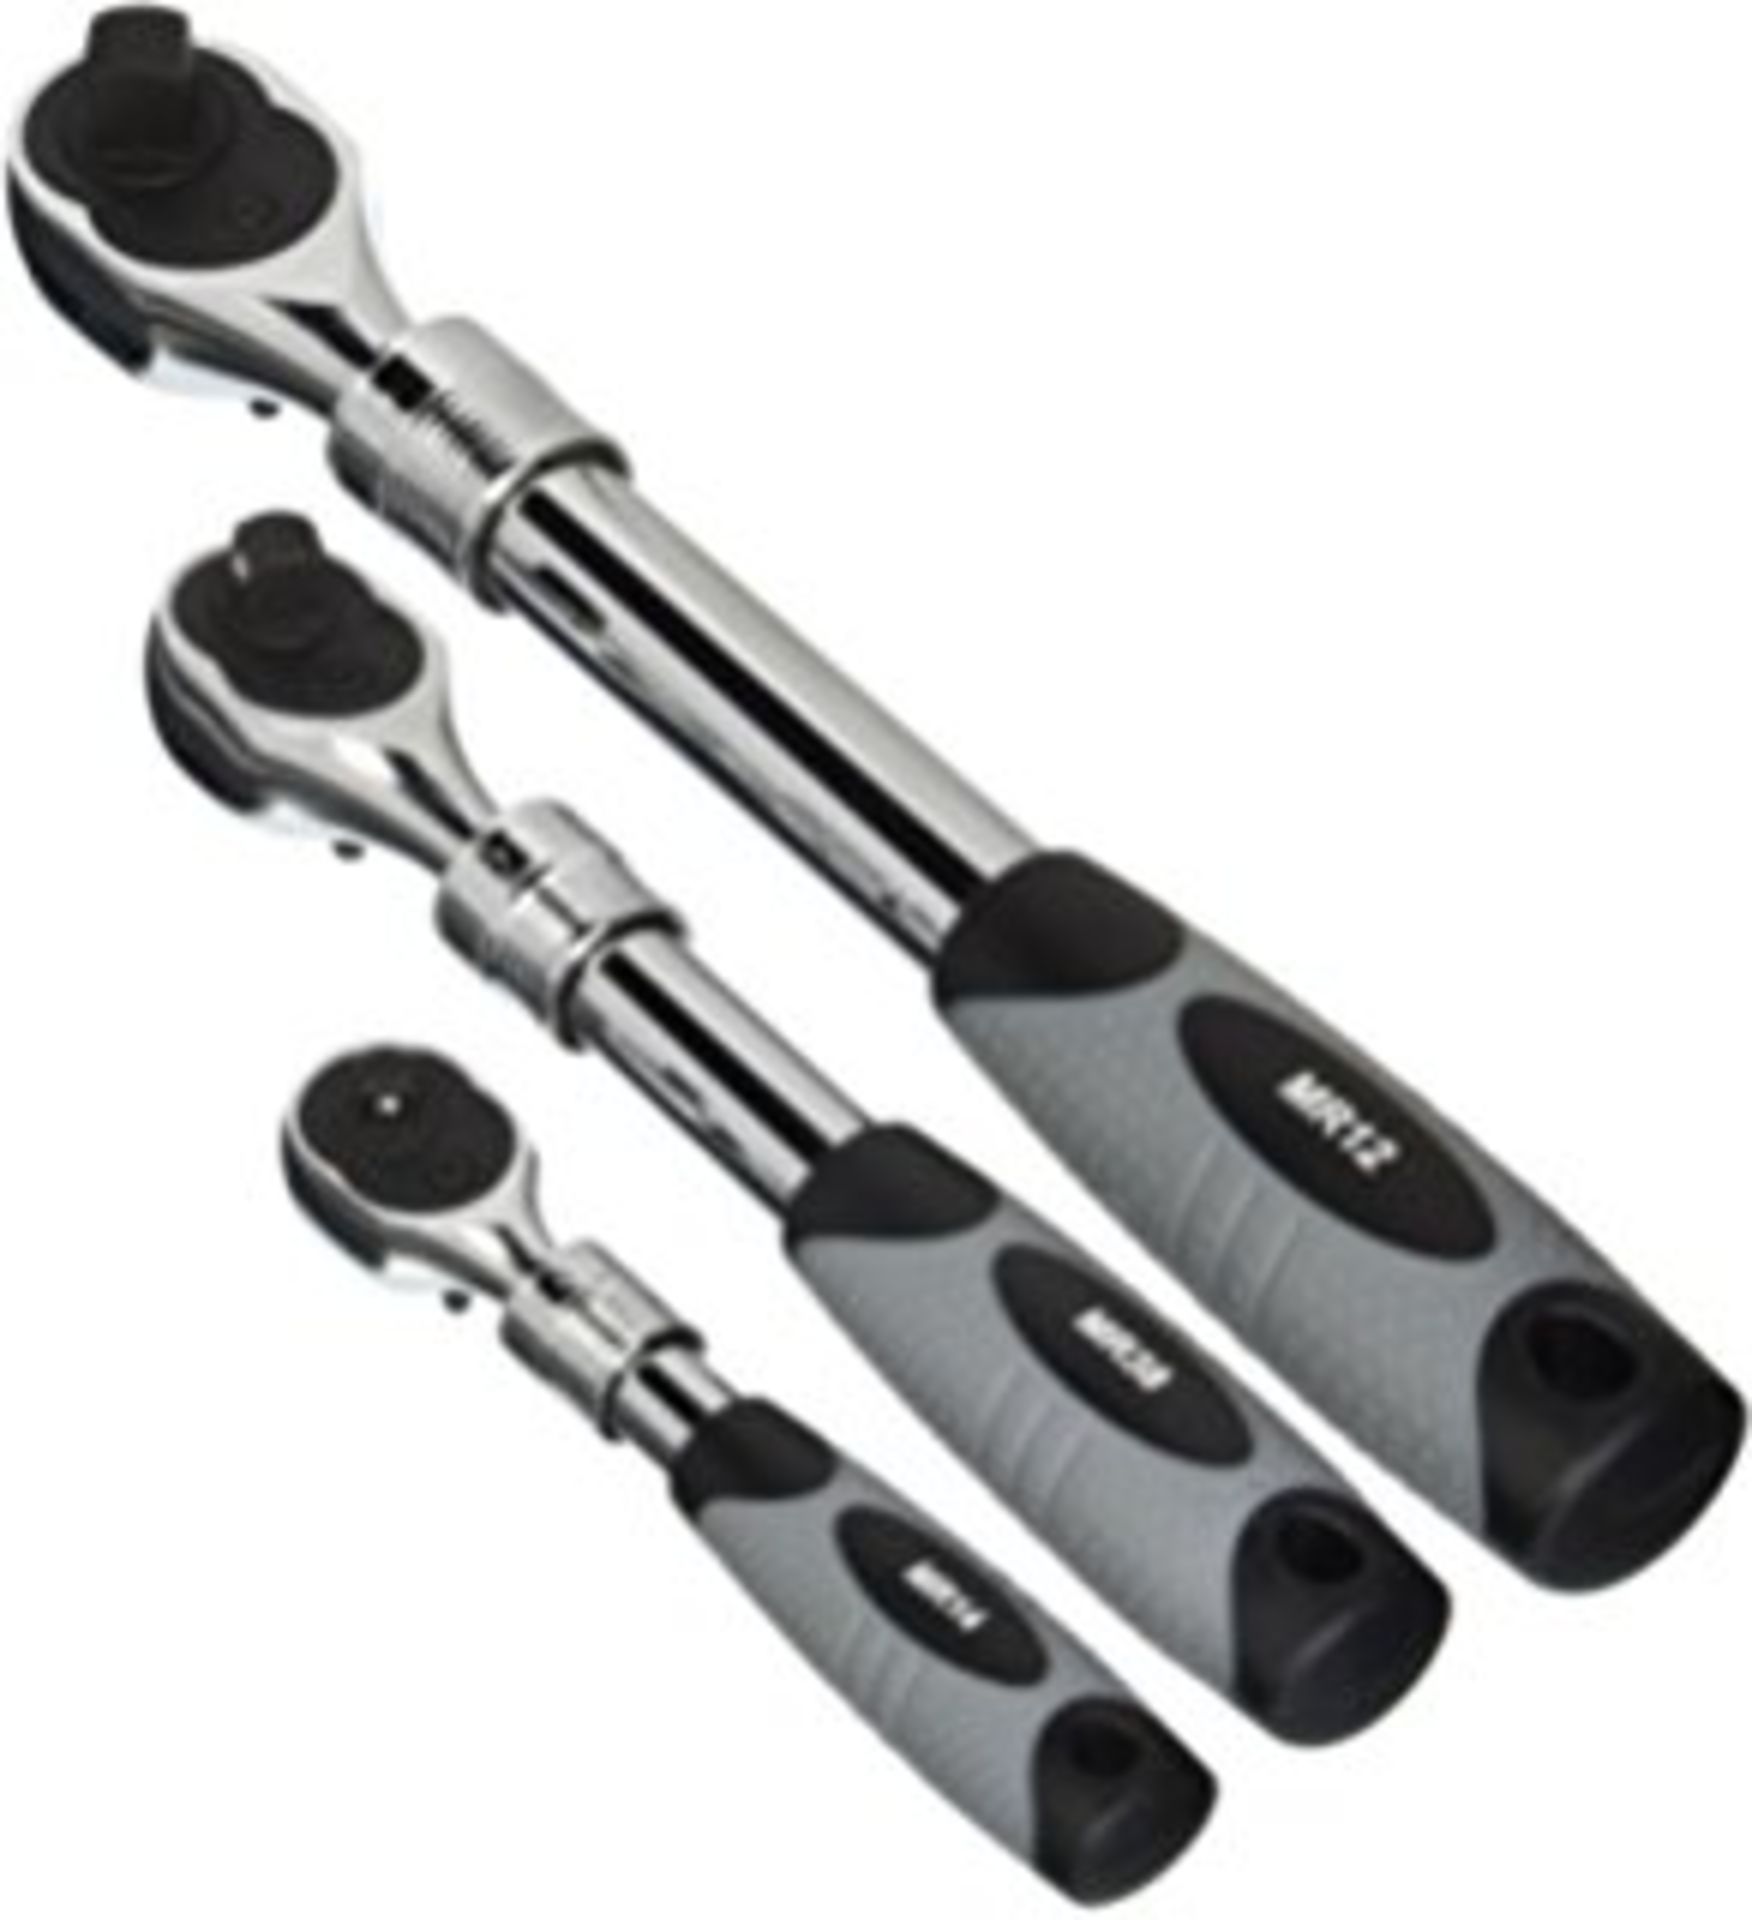 V Brand New Three Piece 1/4" 3/8" and 1/2" Drive Extendable Ratchet Set (Please note item is similar